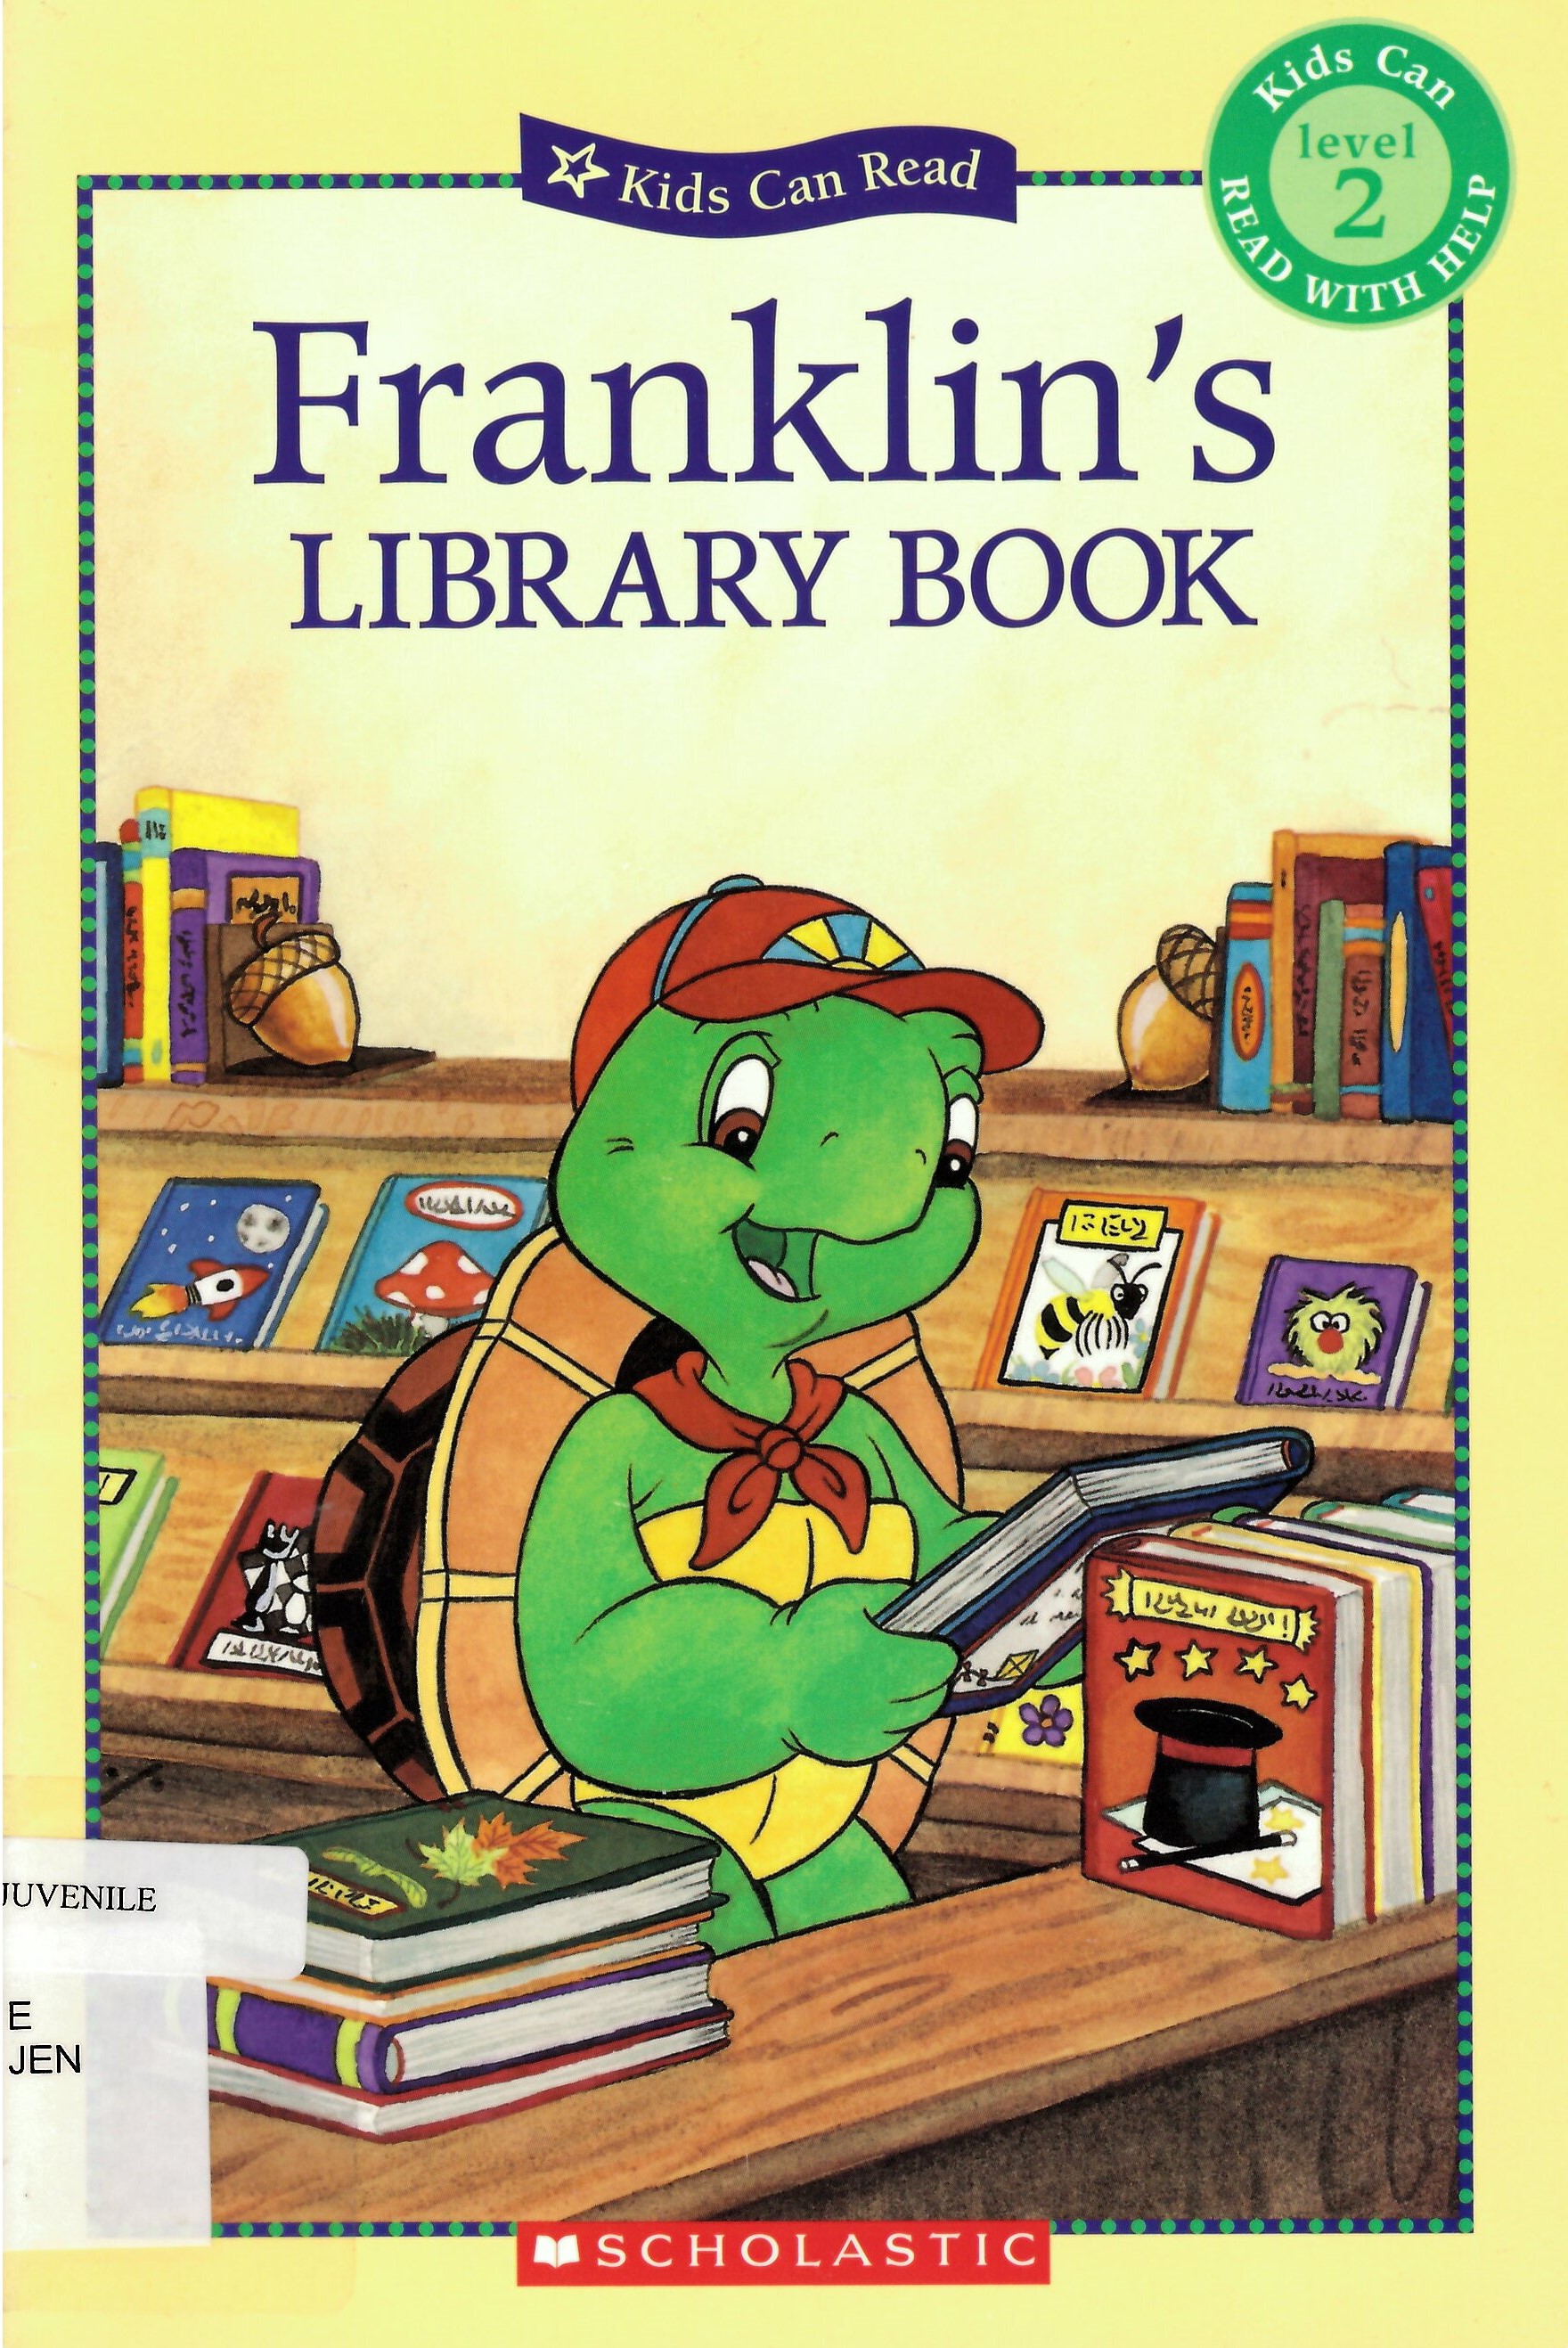 Franklin's library book